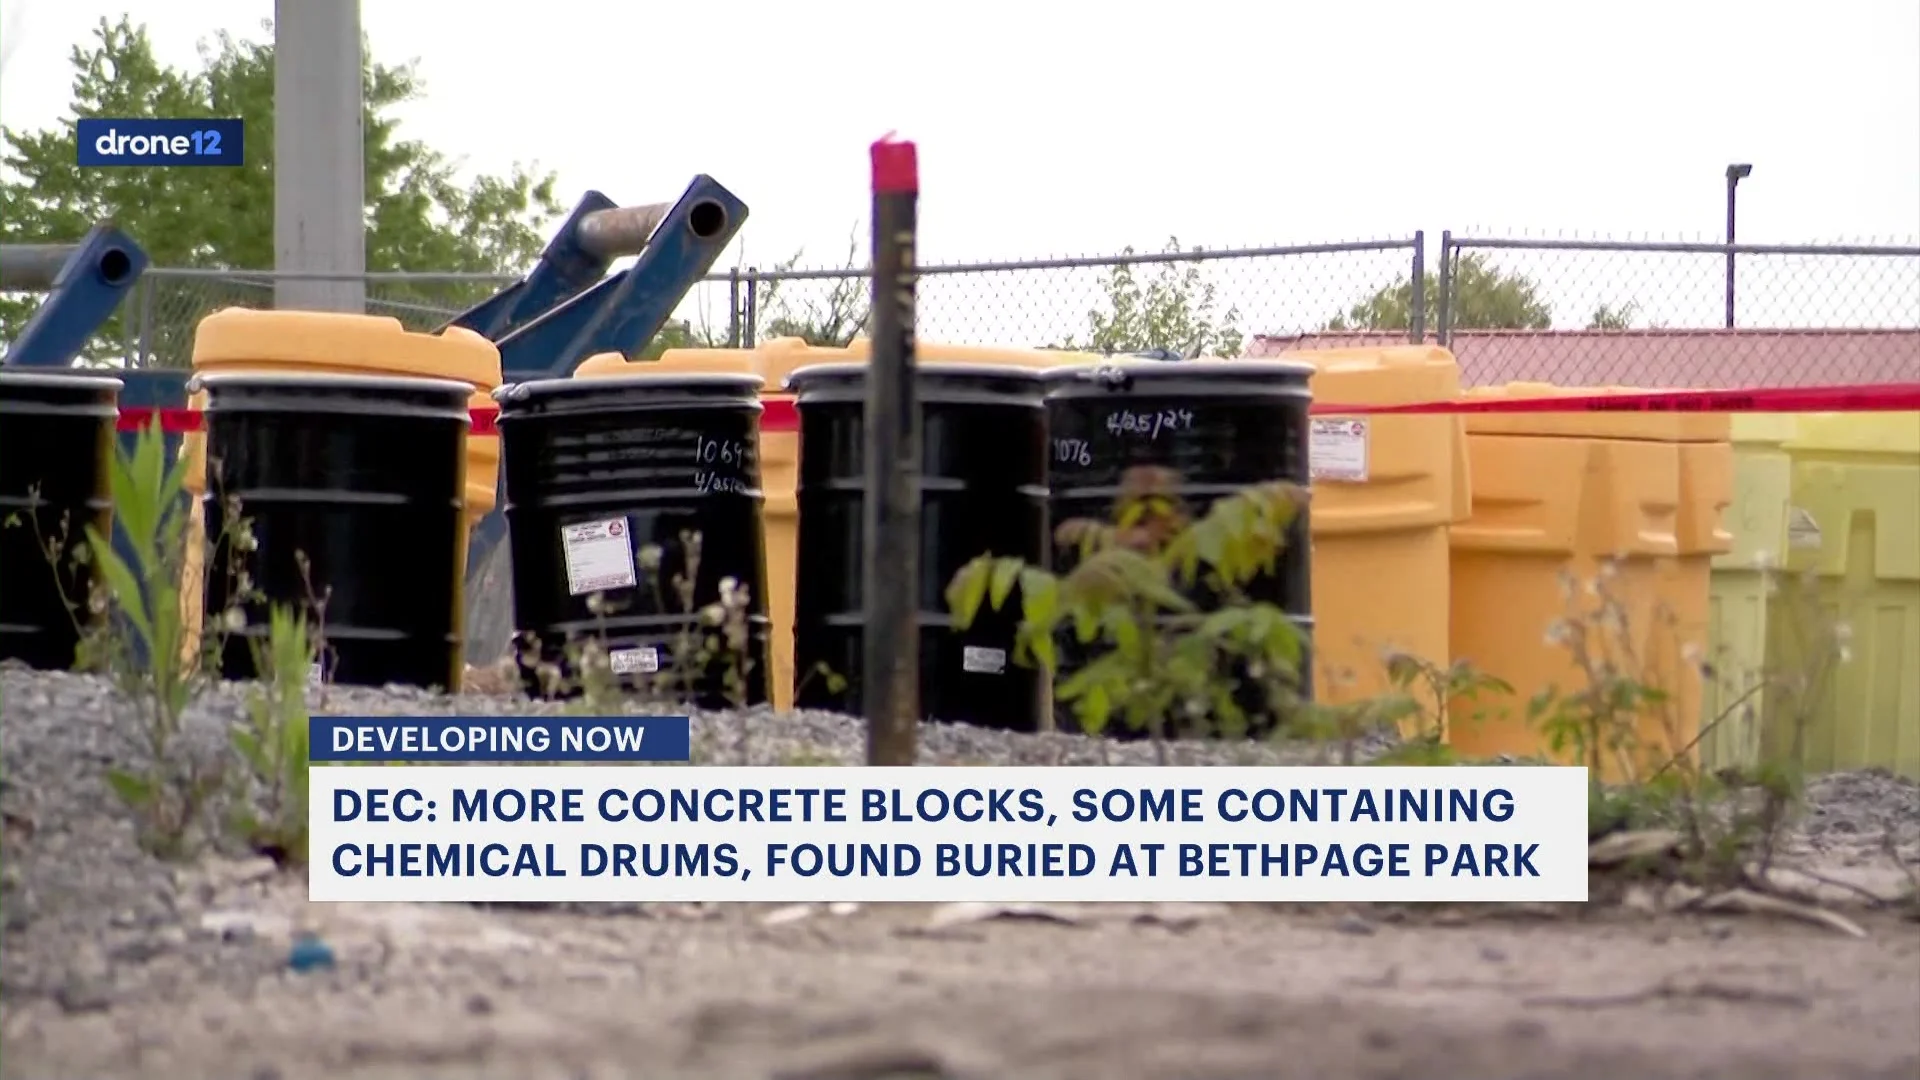 DEC: 6 more concrete blocks, some containing chemical drums, found buried at Bethpage Park